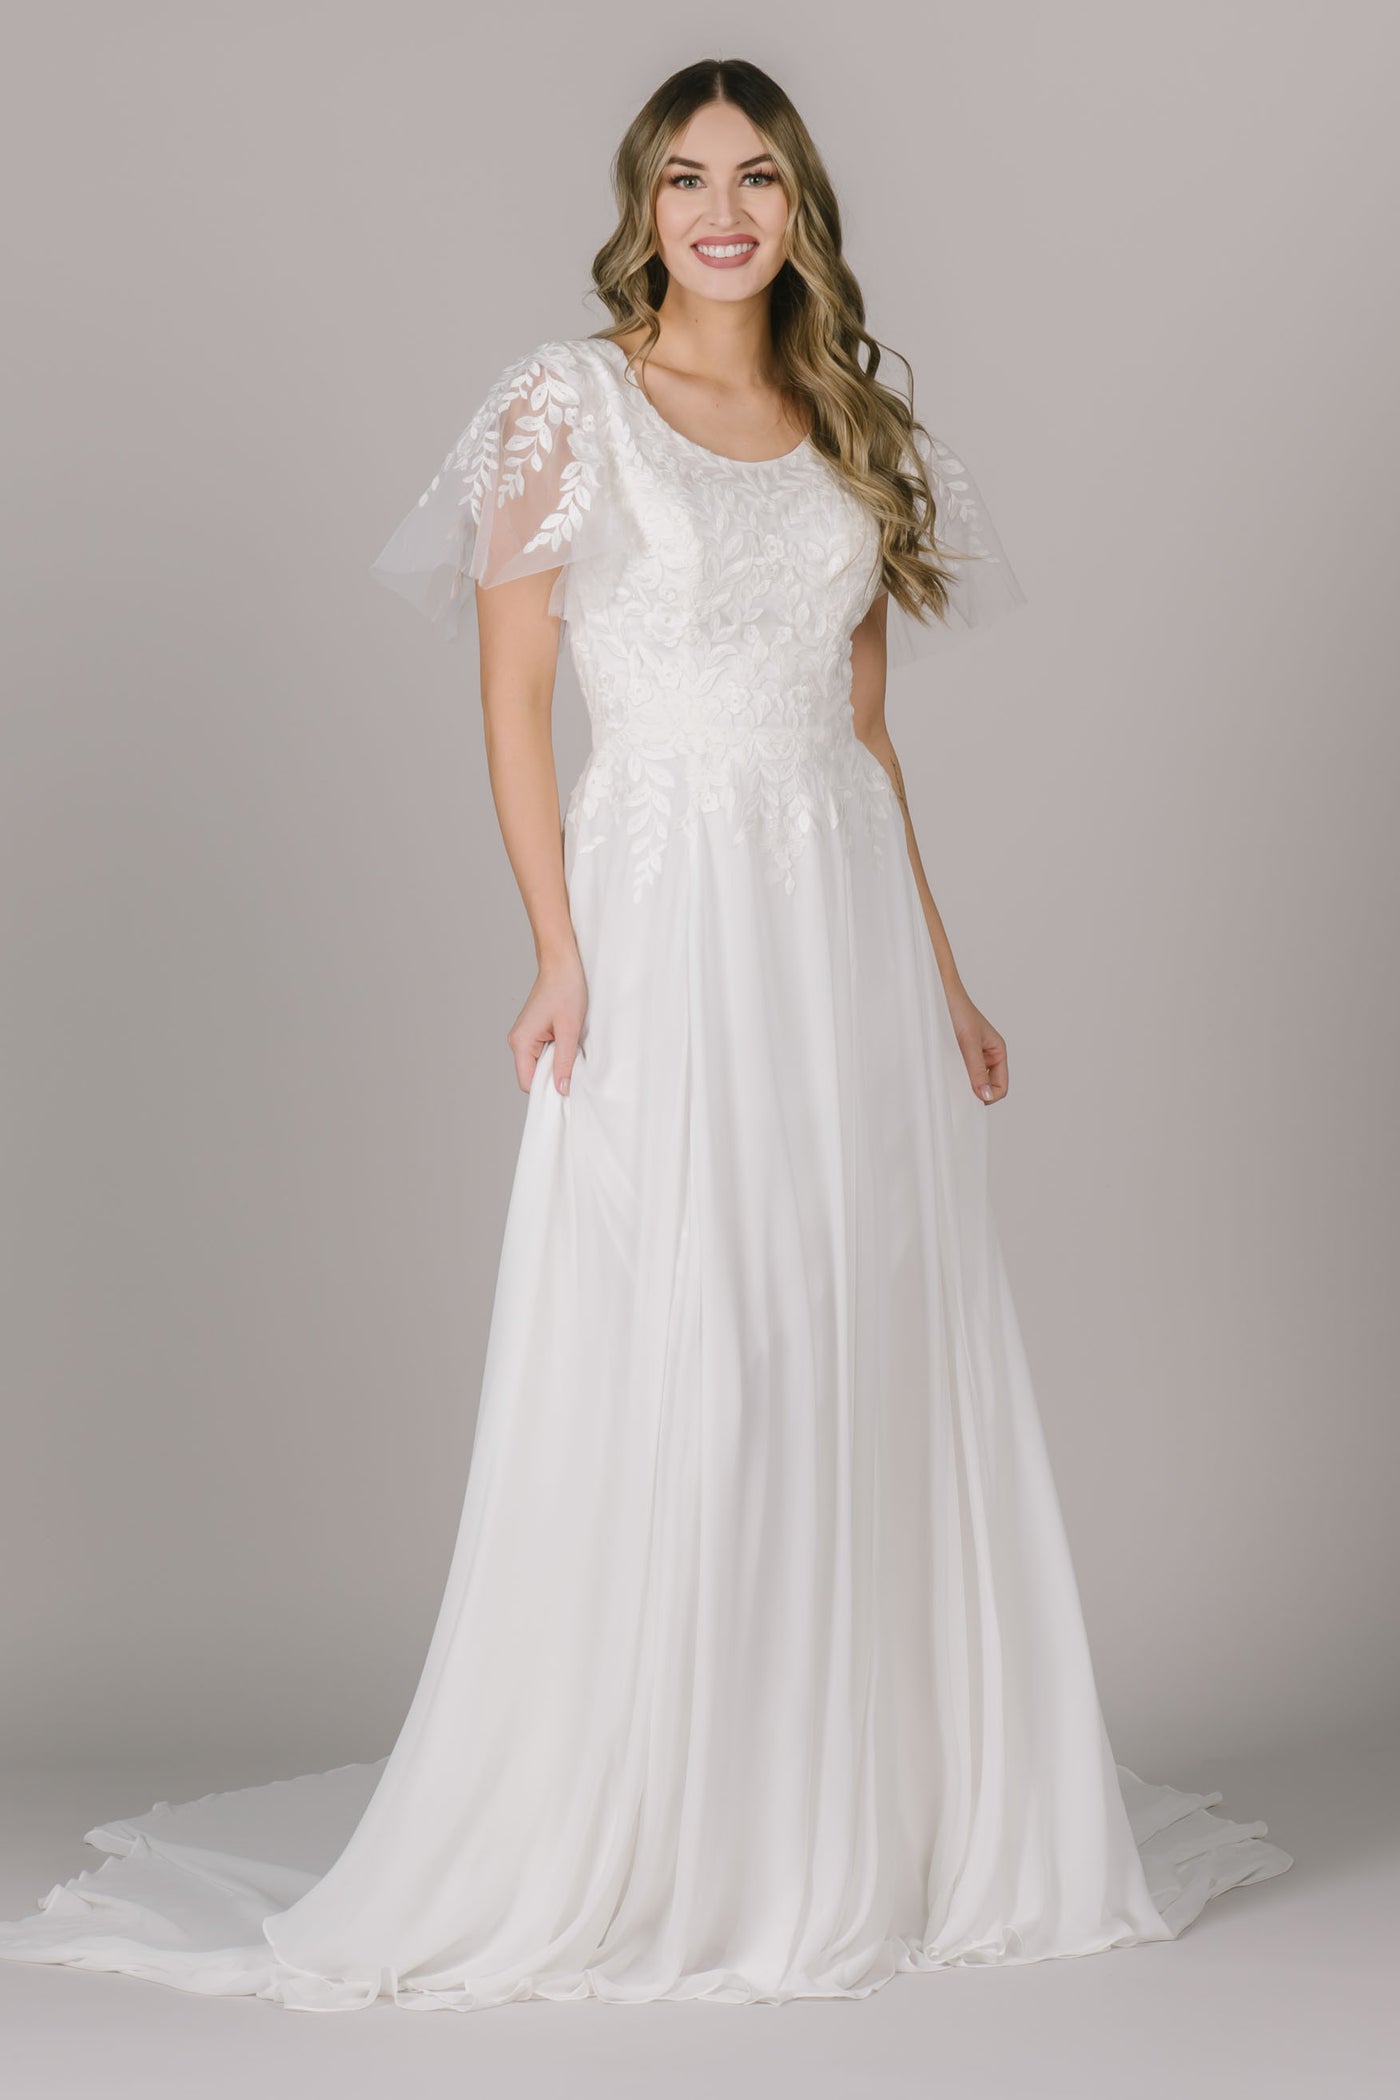 A modest wedding dress in Utah features beautiful falling lace throughout the sleeves and bodice of the dress, a scoop neck, and a-line silhouette that flatters every body type!